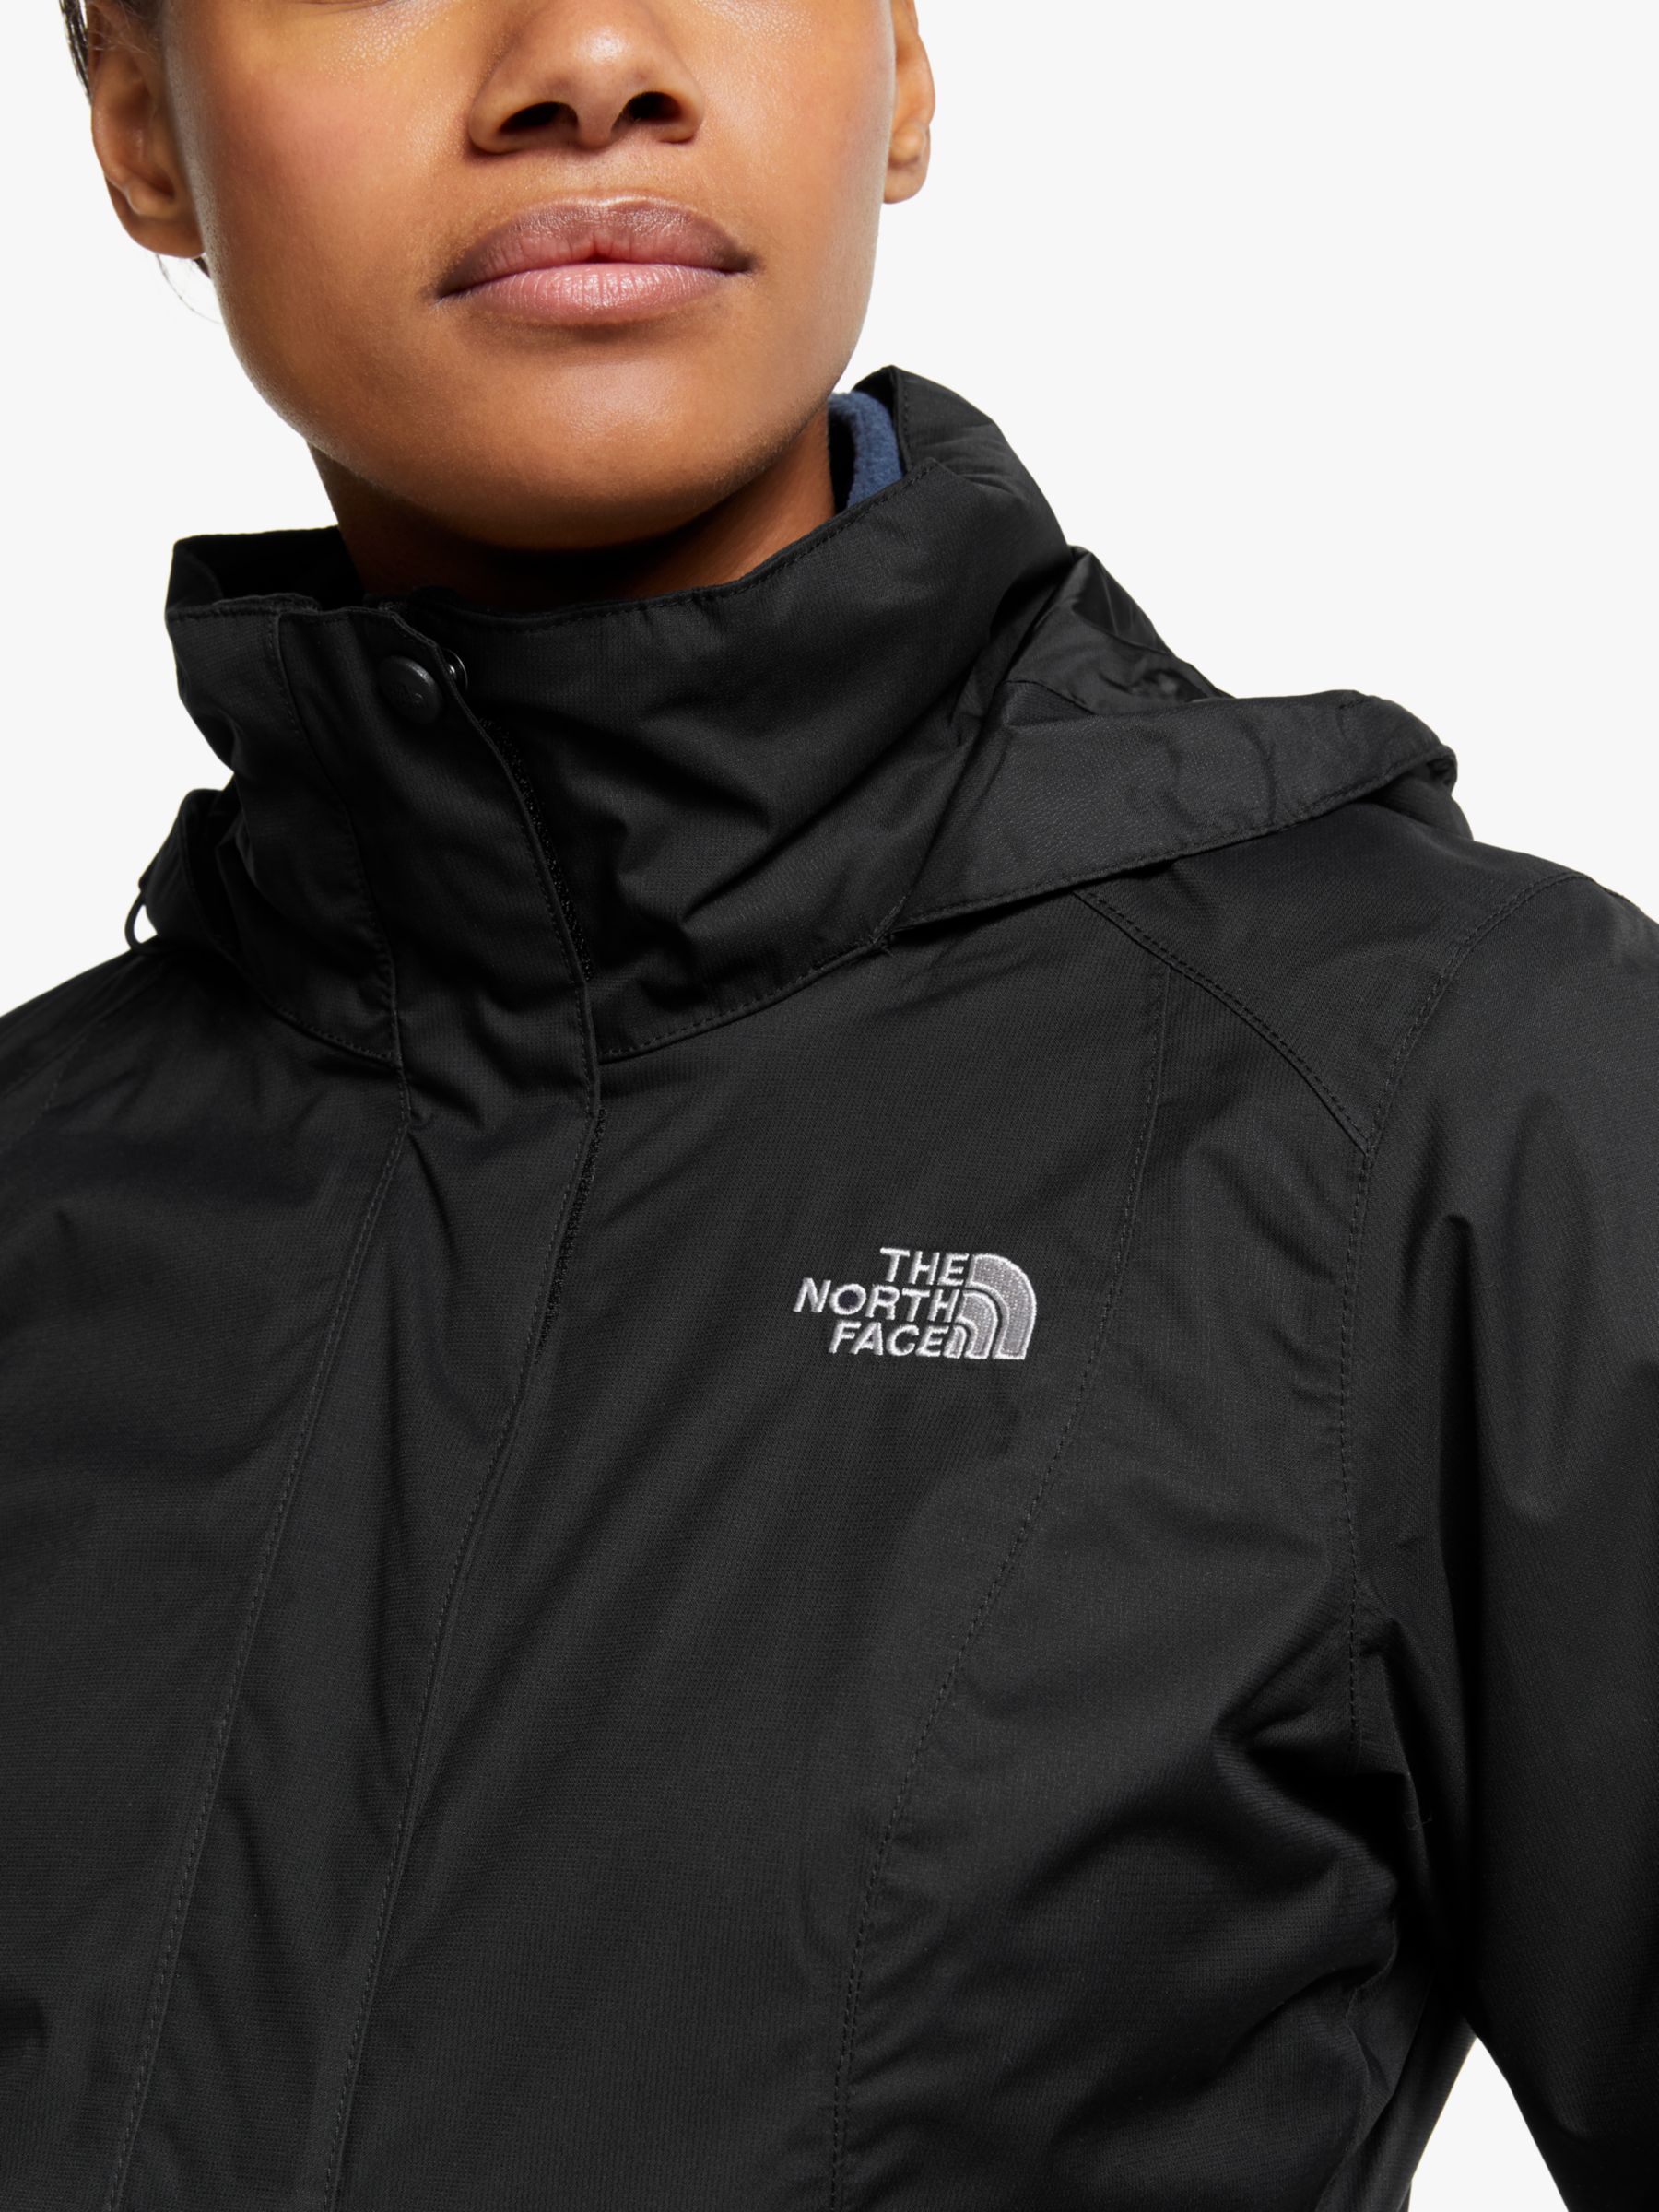 north face 2 in 1 jacket women's